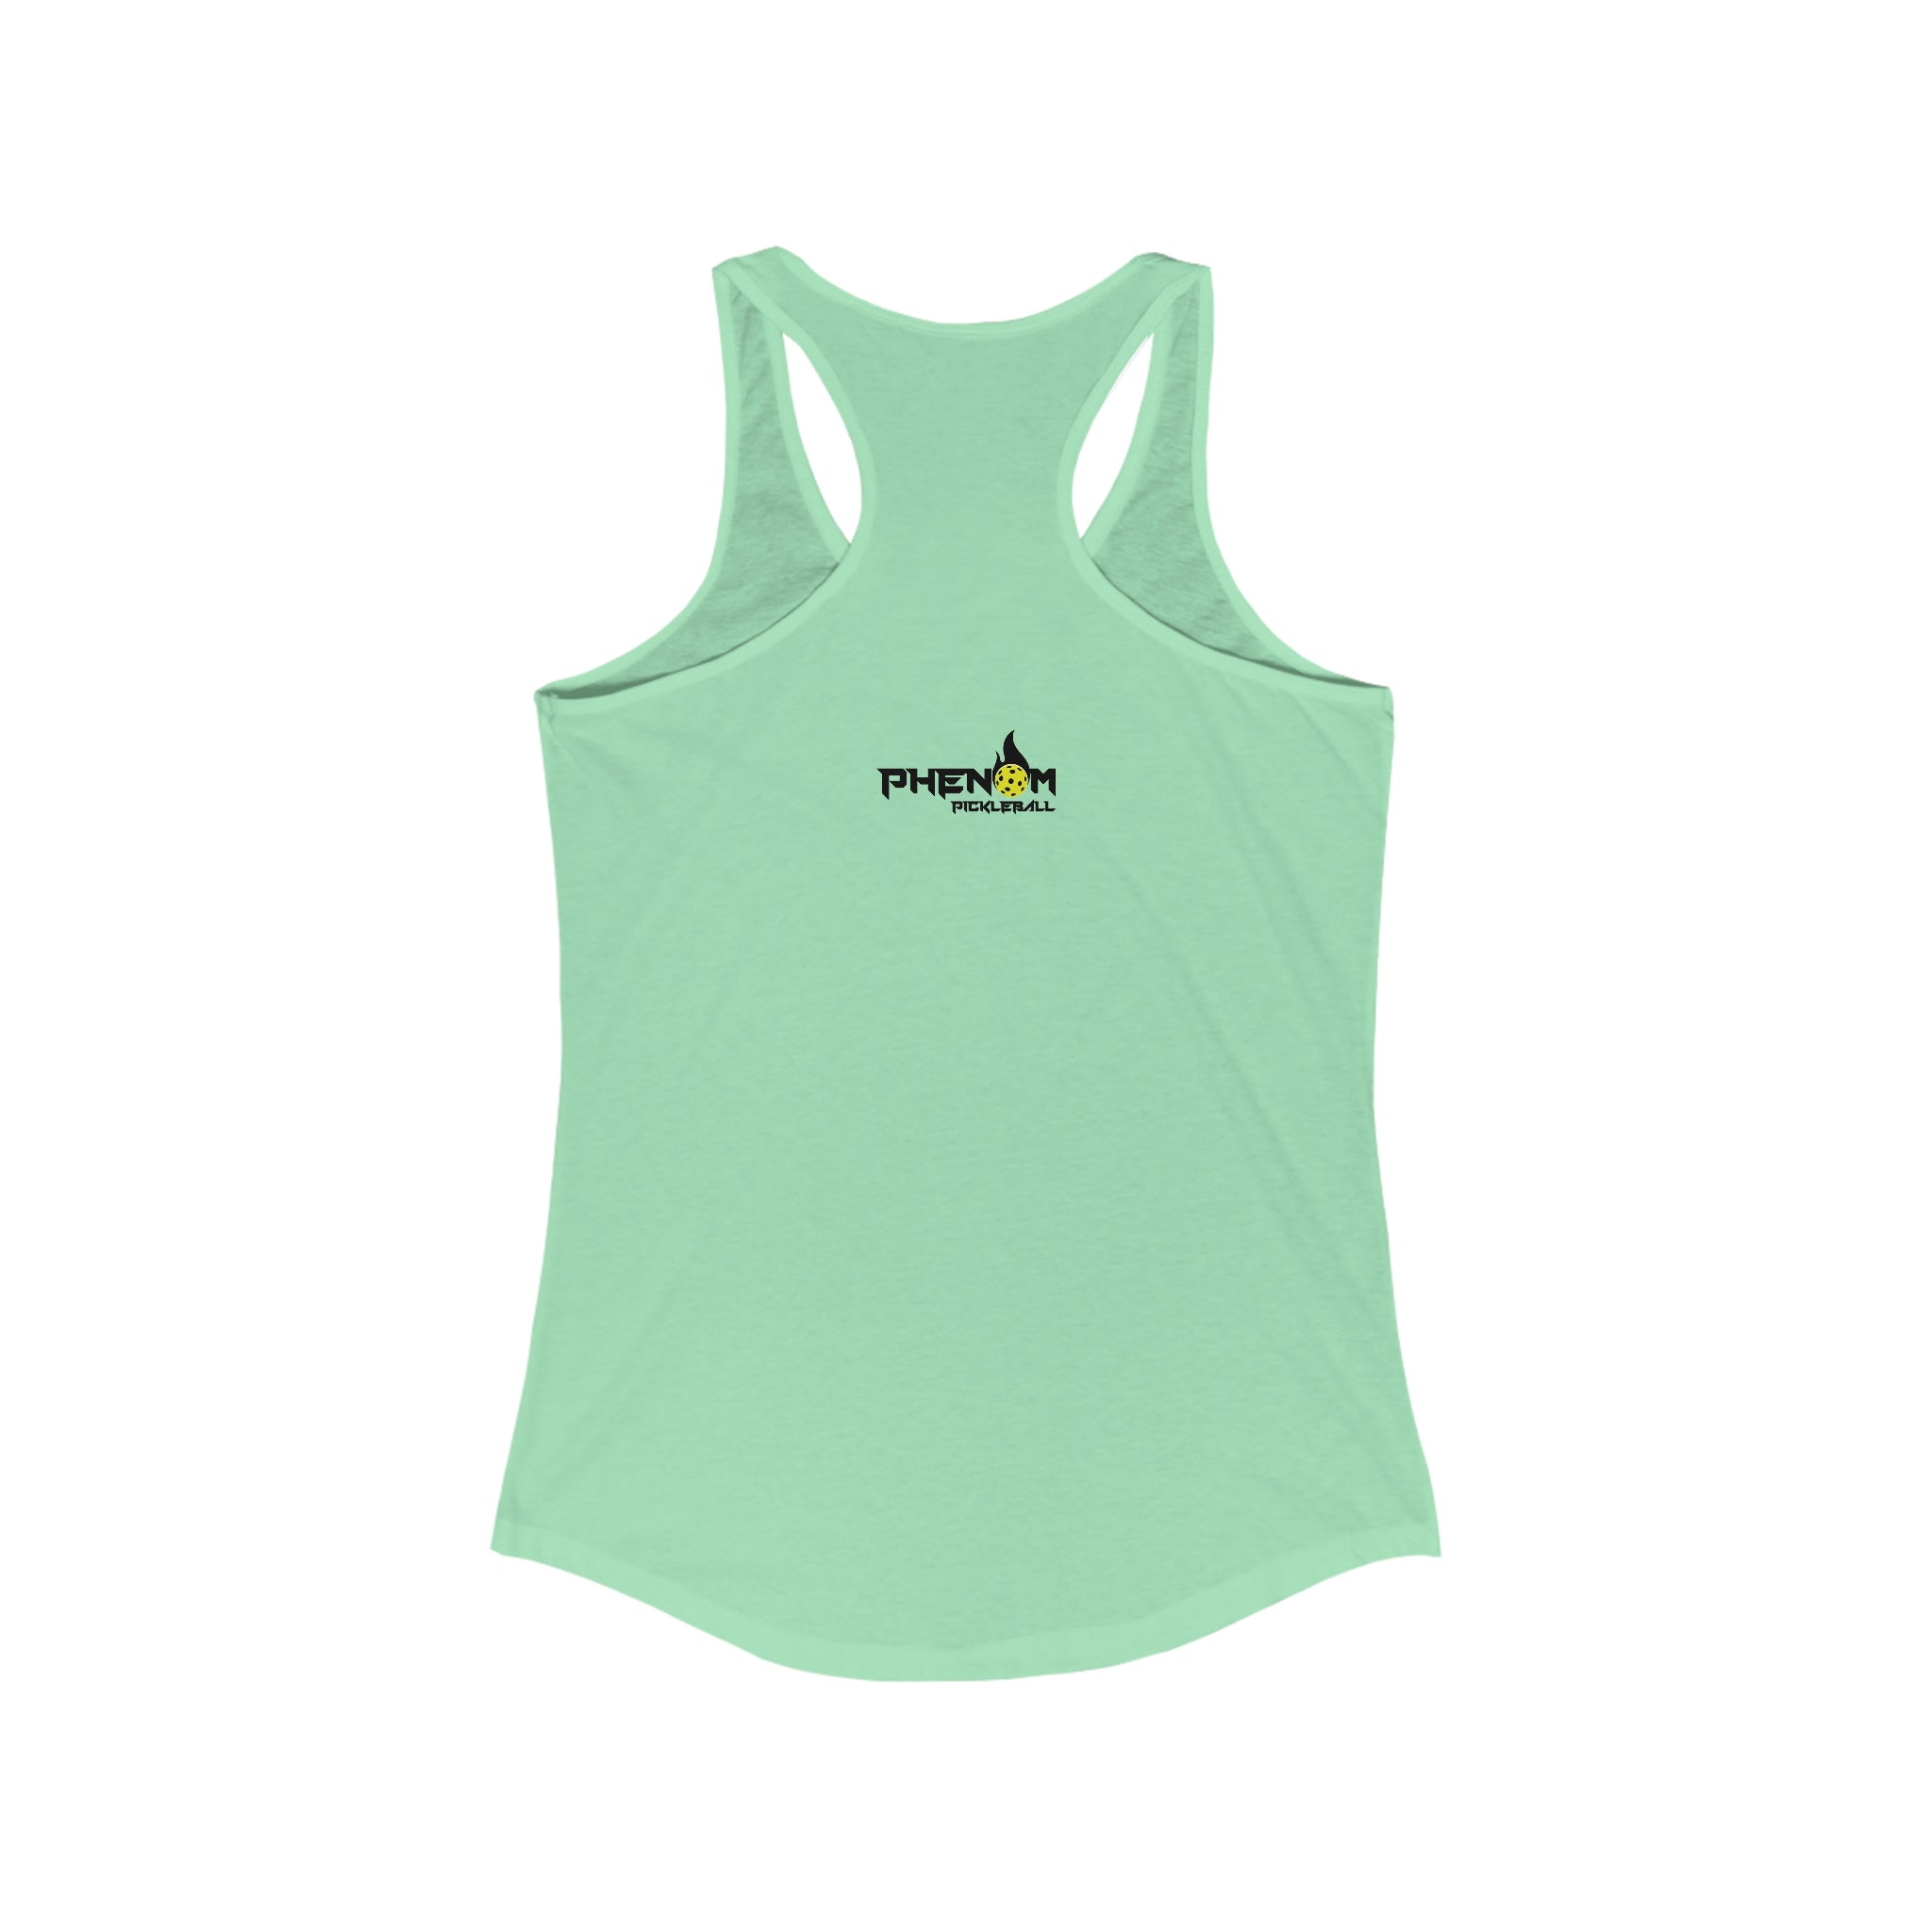 mint green just here for the dinks and giggles women's racerback tank top pickleball apparel phenom logo back view